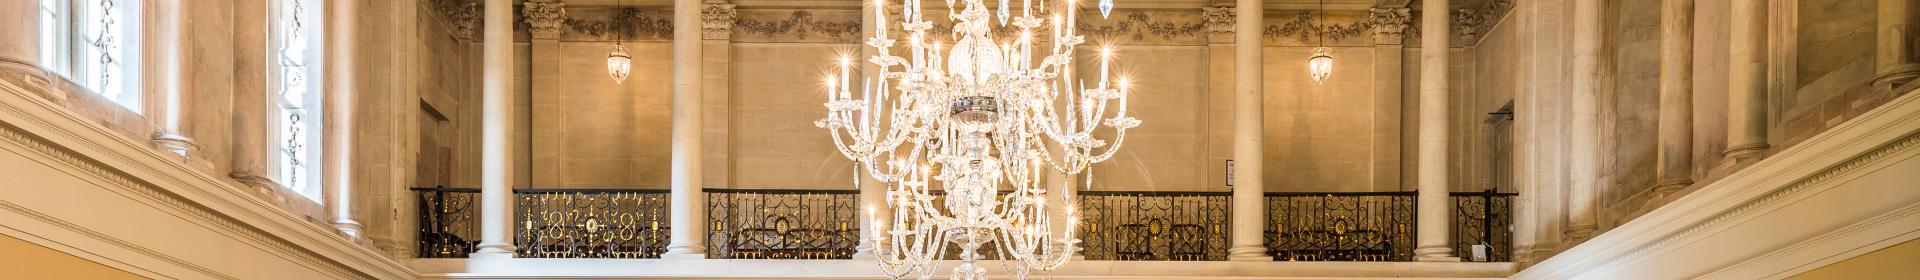 Image: Chandeliers in the Assembly Rooms. Image by Andy Fletcher